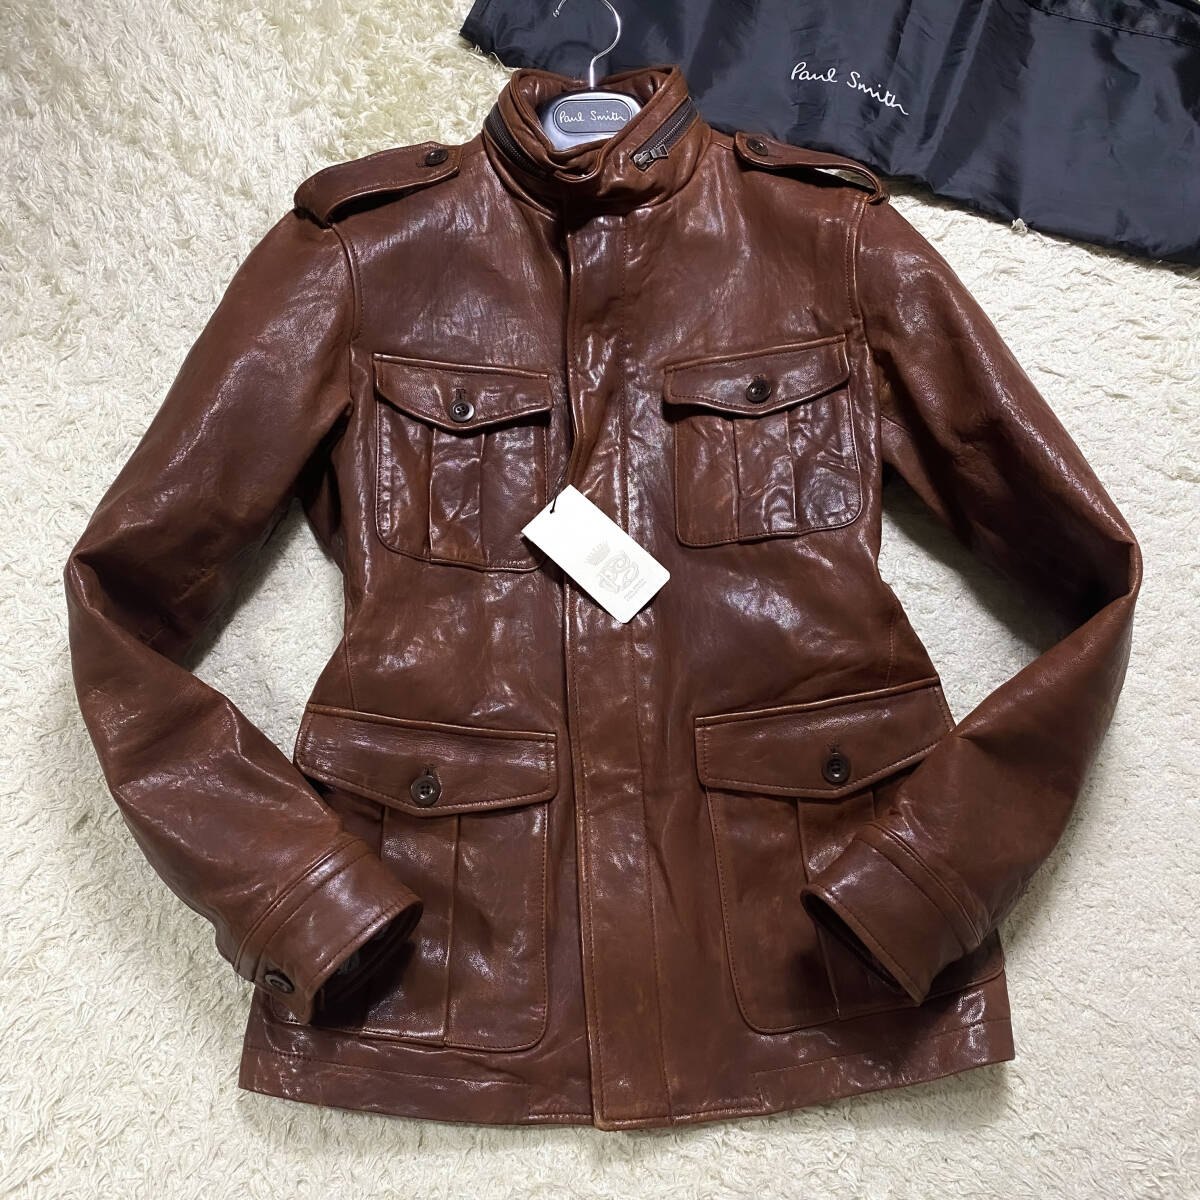  top class sheep leather PaulSmith LondonM-65 military napa leather jacket XL.LL~L black Brown black tea ram leather Single Rider's Paul Smith 